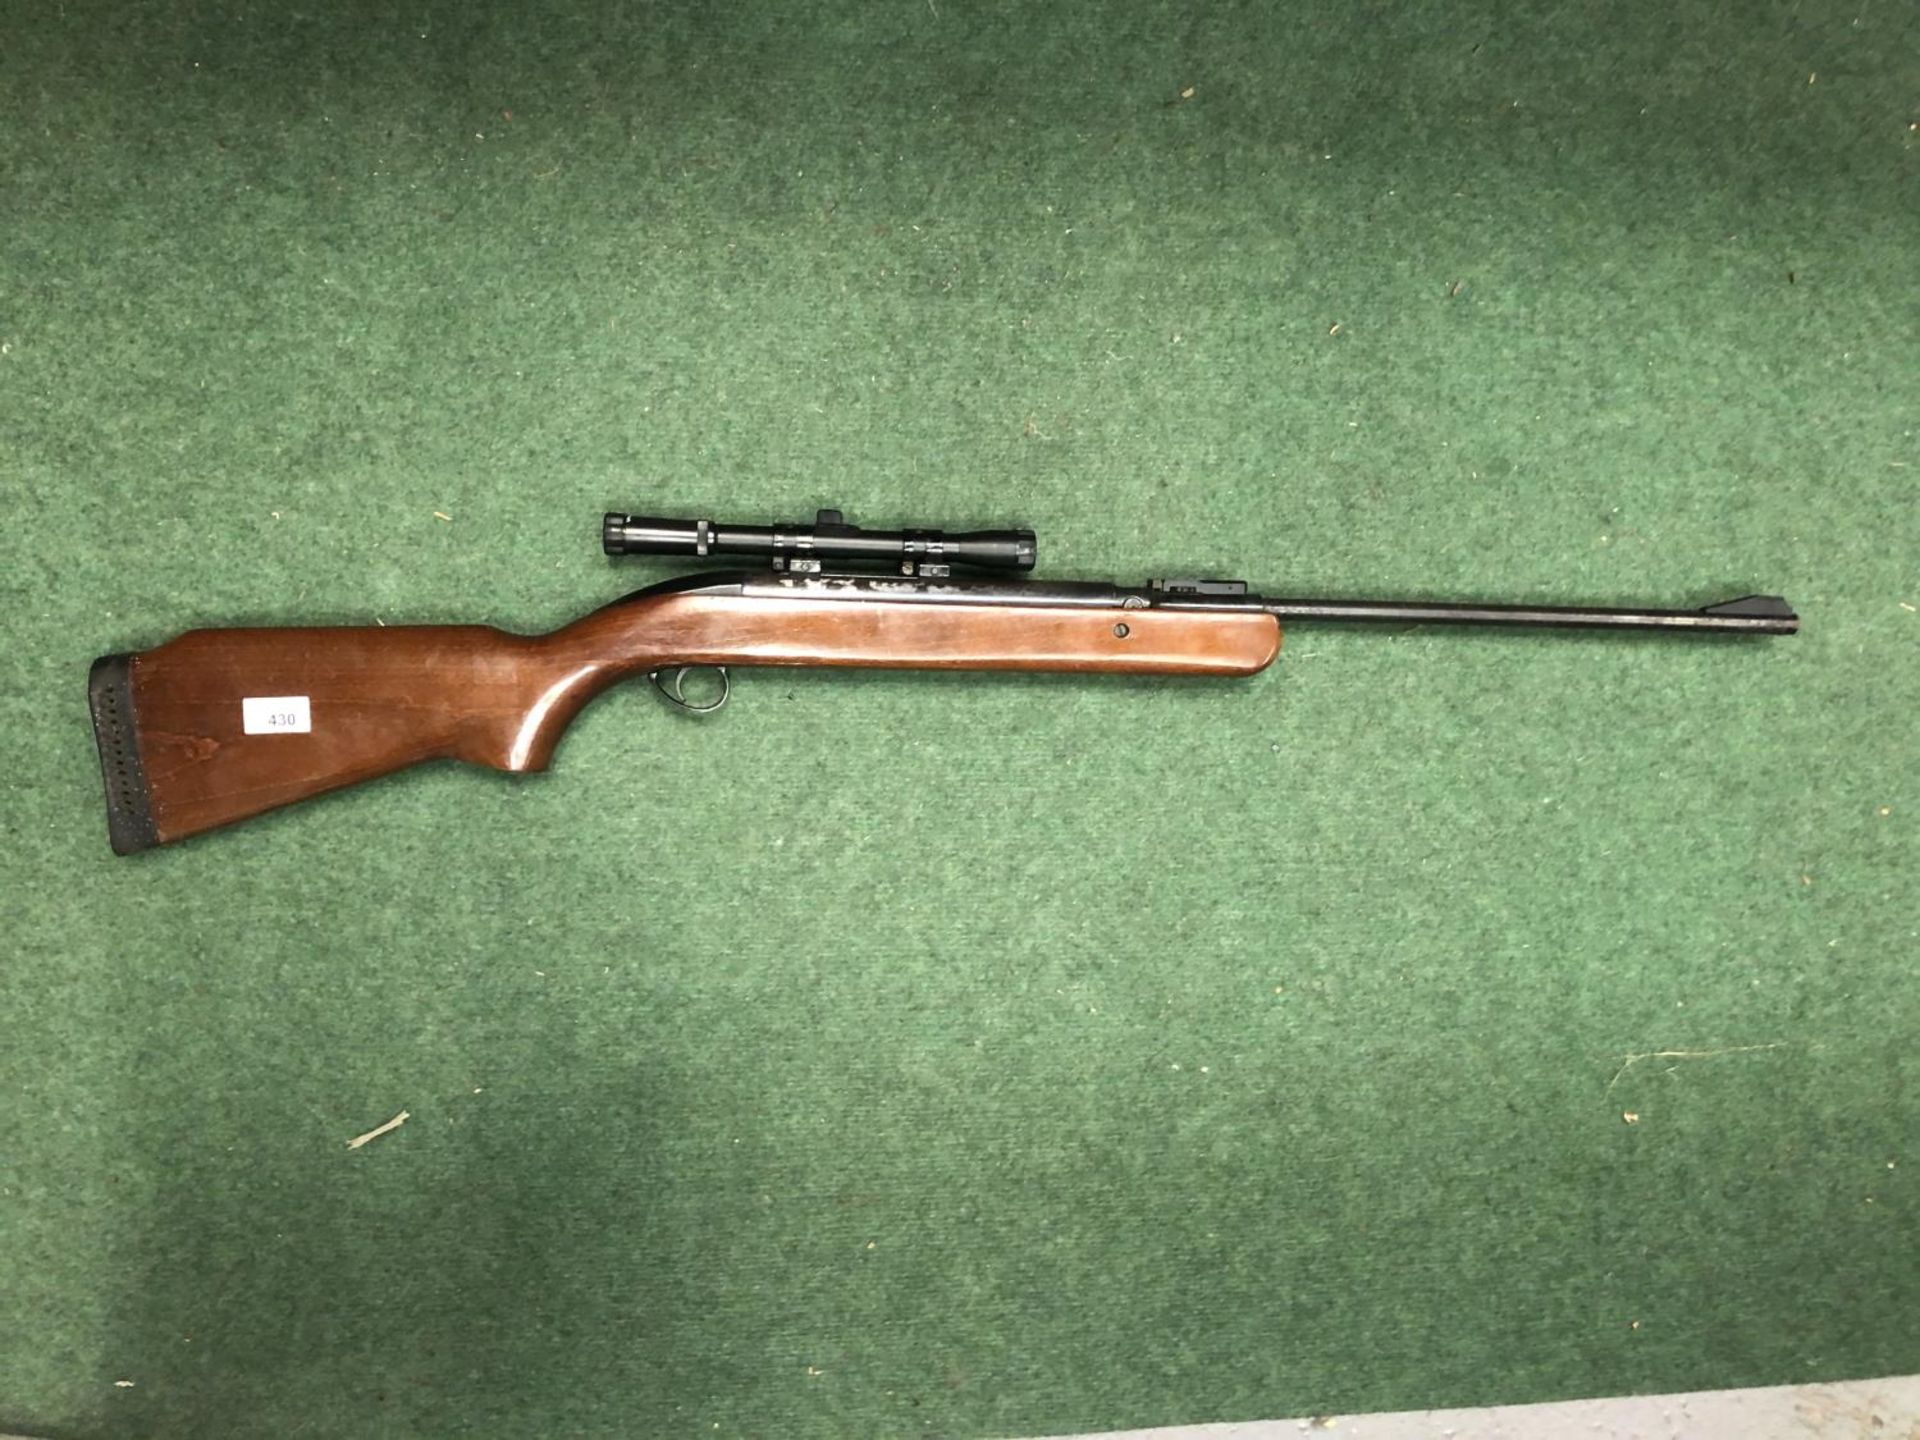 A BSA AIRSPORTER .22 CALIBRE AIR RIFLE, 47CM BARREL COMPLETE WITH TELESCOPIC SIGHT